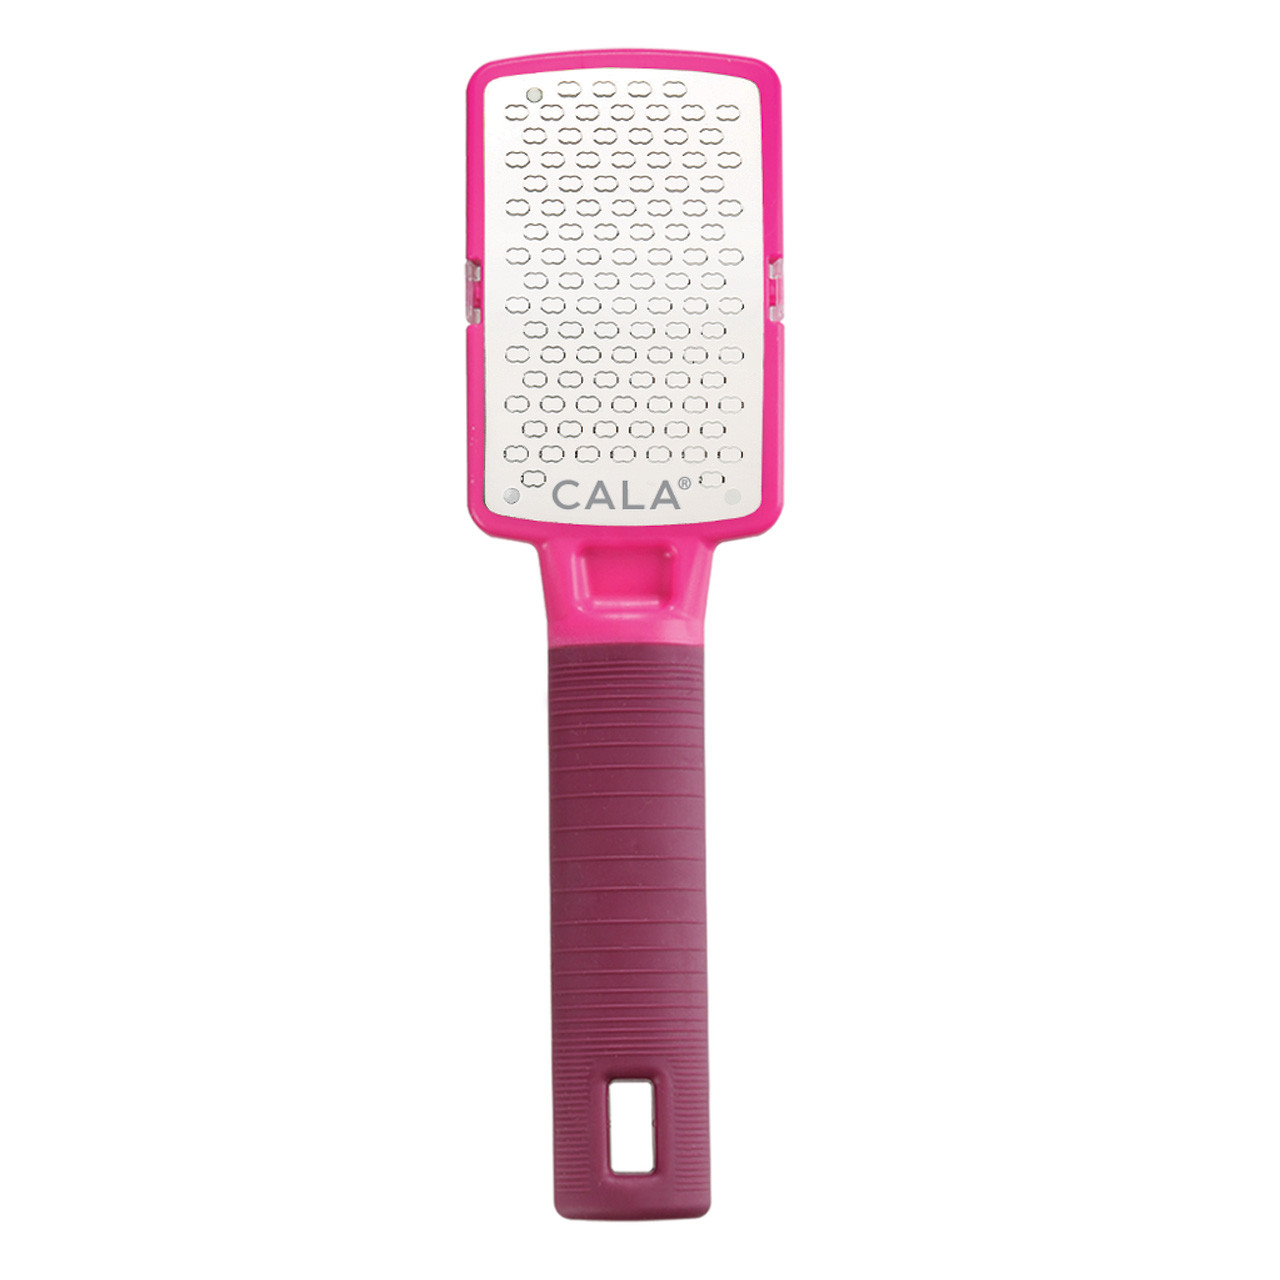 https://cdn11.bigcommerce.com/s-djp6s5xq1z/images/stencil/1280x1280/products/999/1920/50709-silky-glide-luxury-spa-pro-callus-remover-hot-pink__71339.1532471786.jpg?c=2